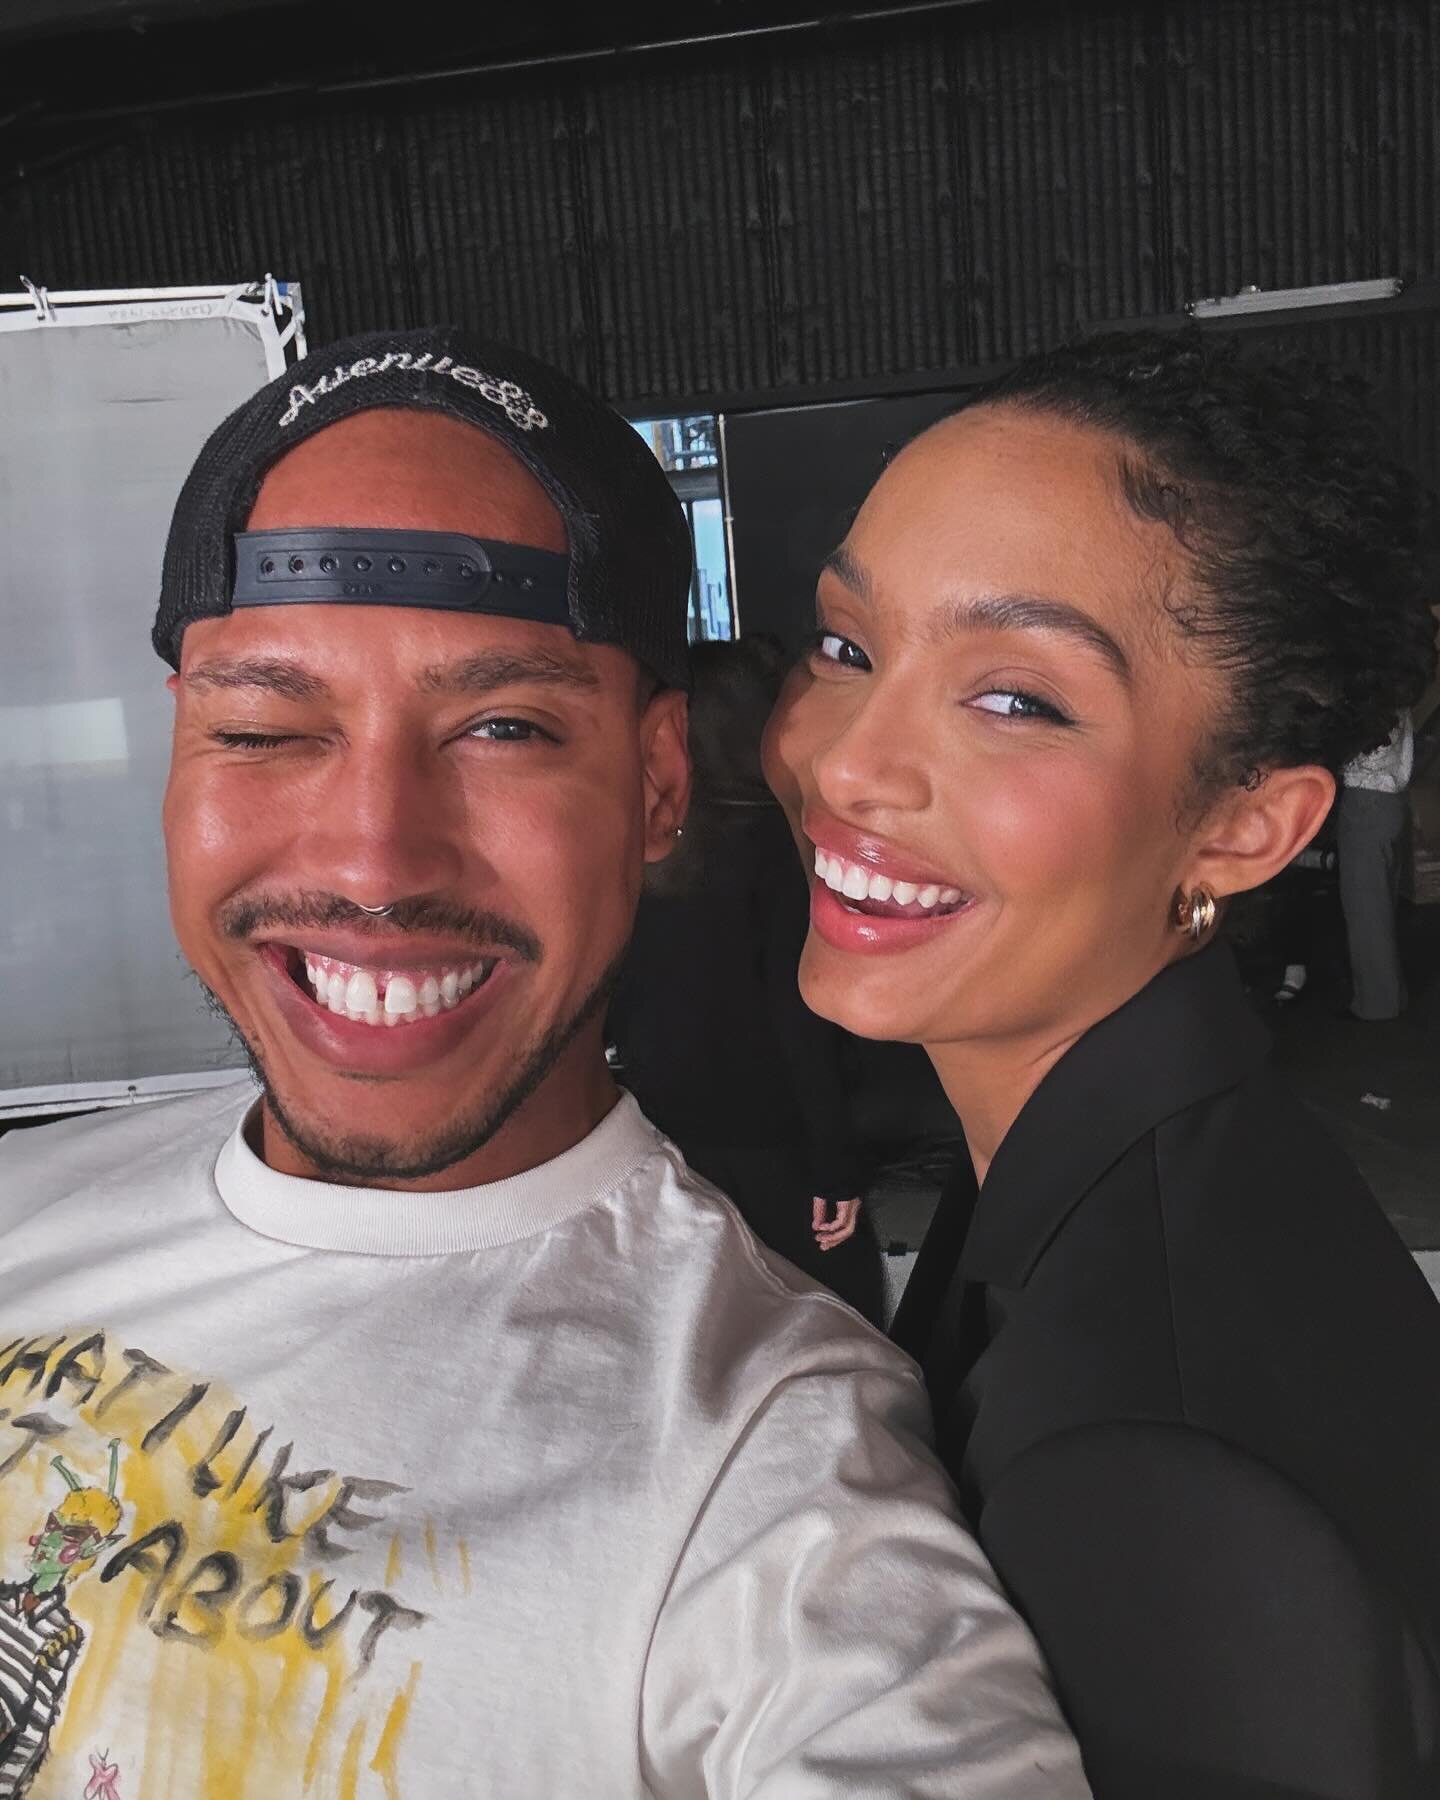 Some bts from the @cartier gig with @yarashahidi